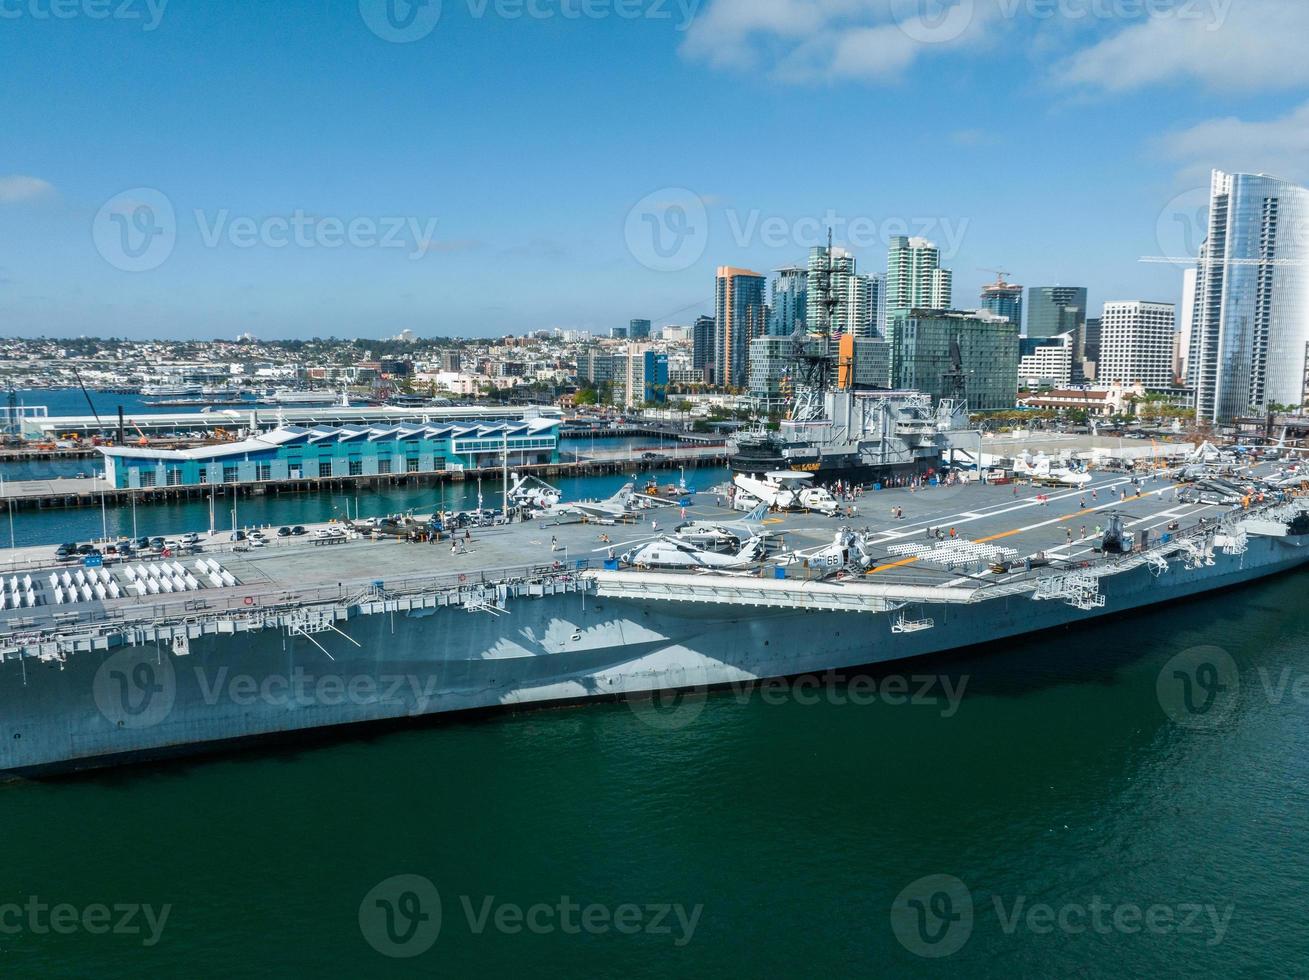 Mighty USS Midway - an aircraft carrier of the United States Navy, the lead ship of its class. photo